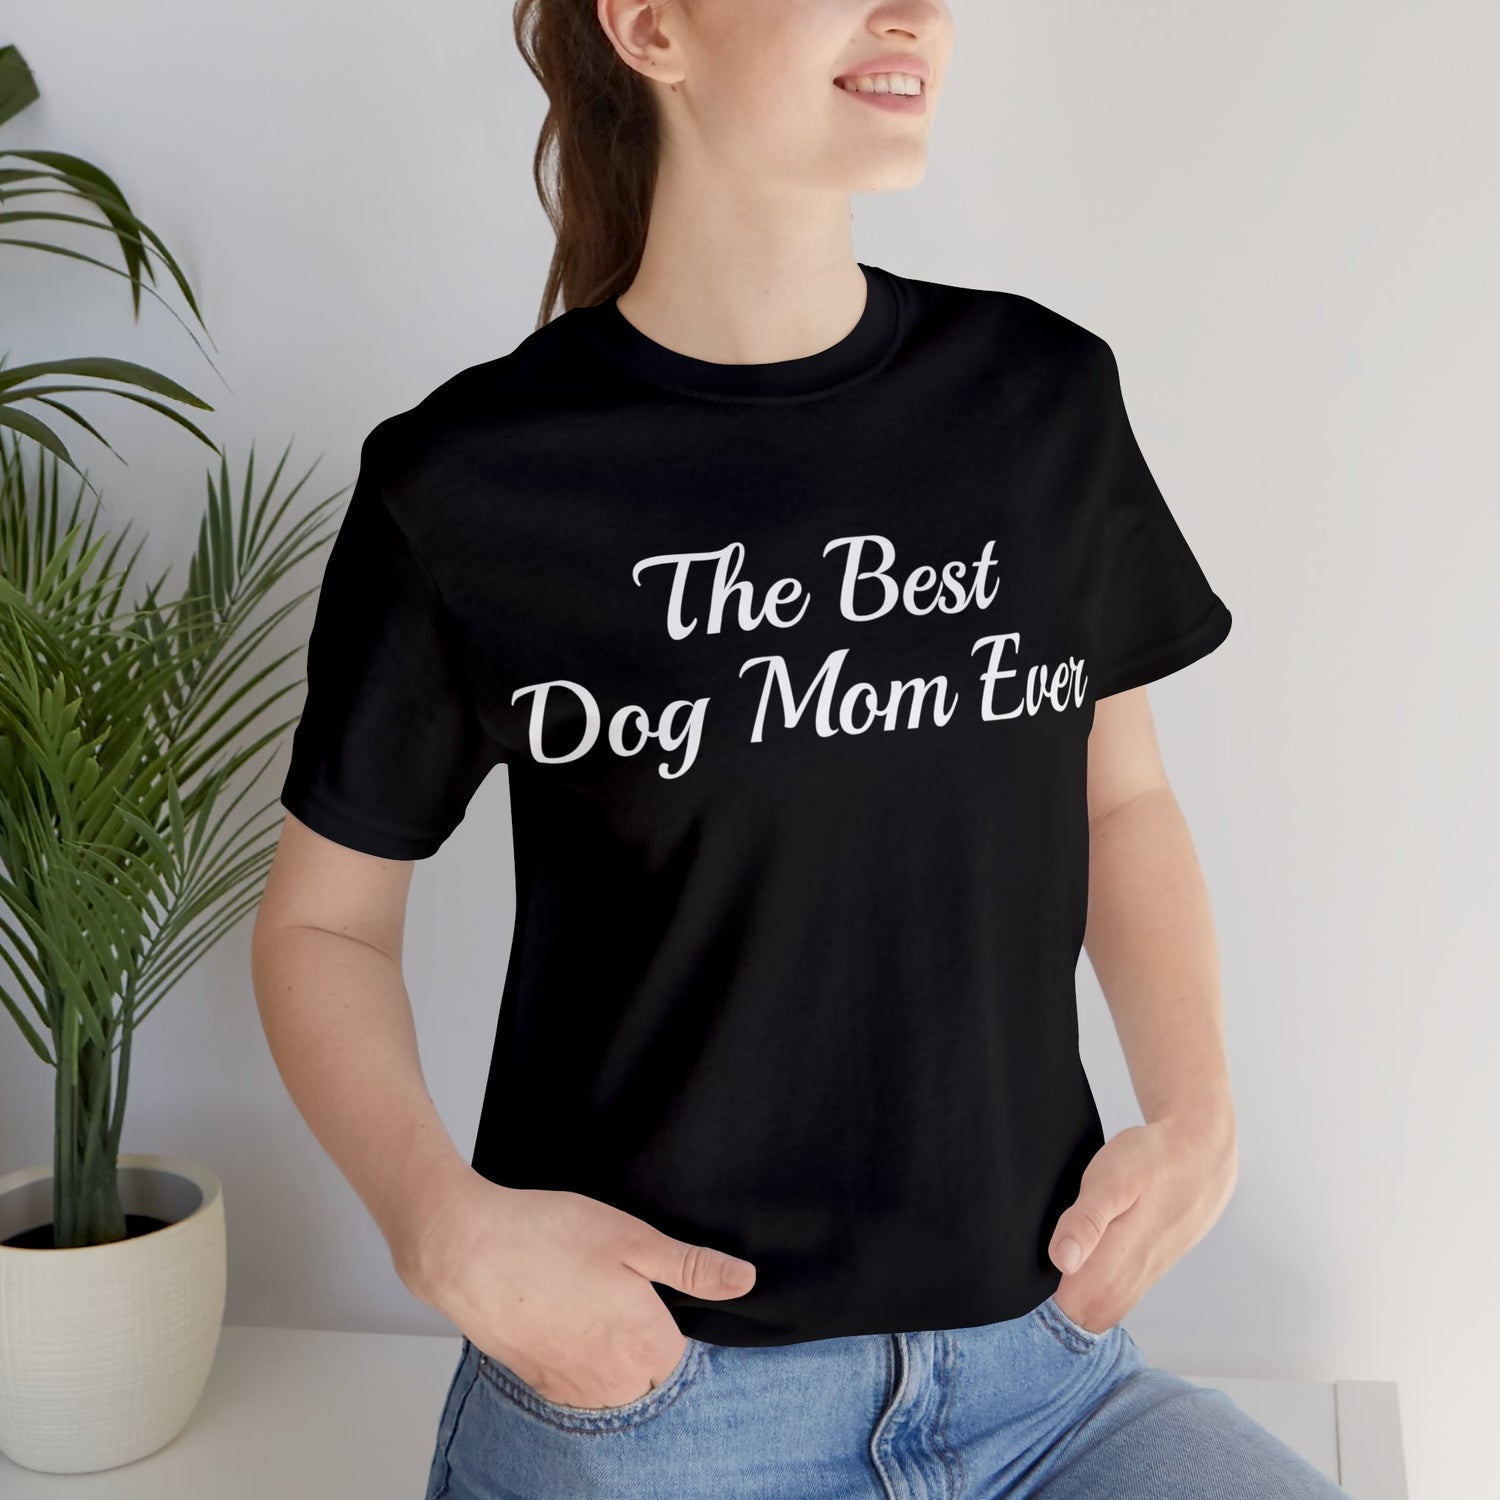 T-Shirt Tshirt Design Gift for Friend and Family Short Sleeved Shirt for Dog Lovers Petrova Designs